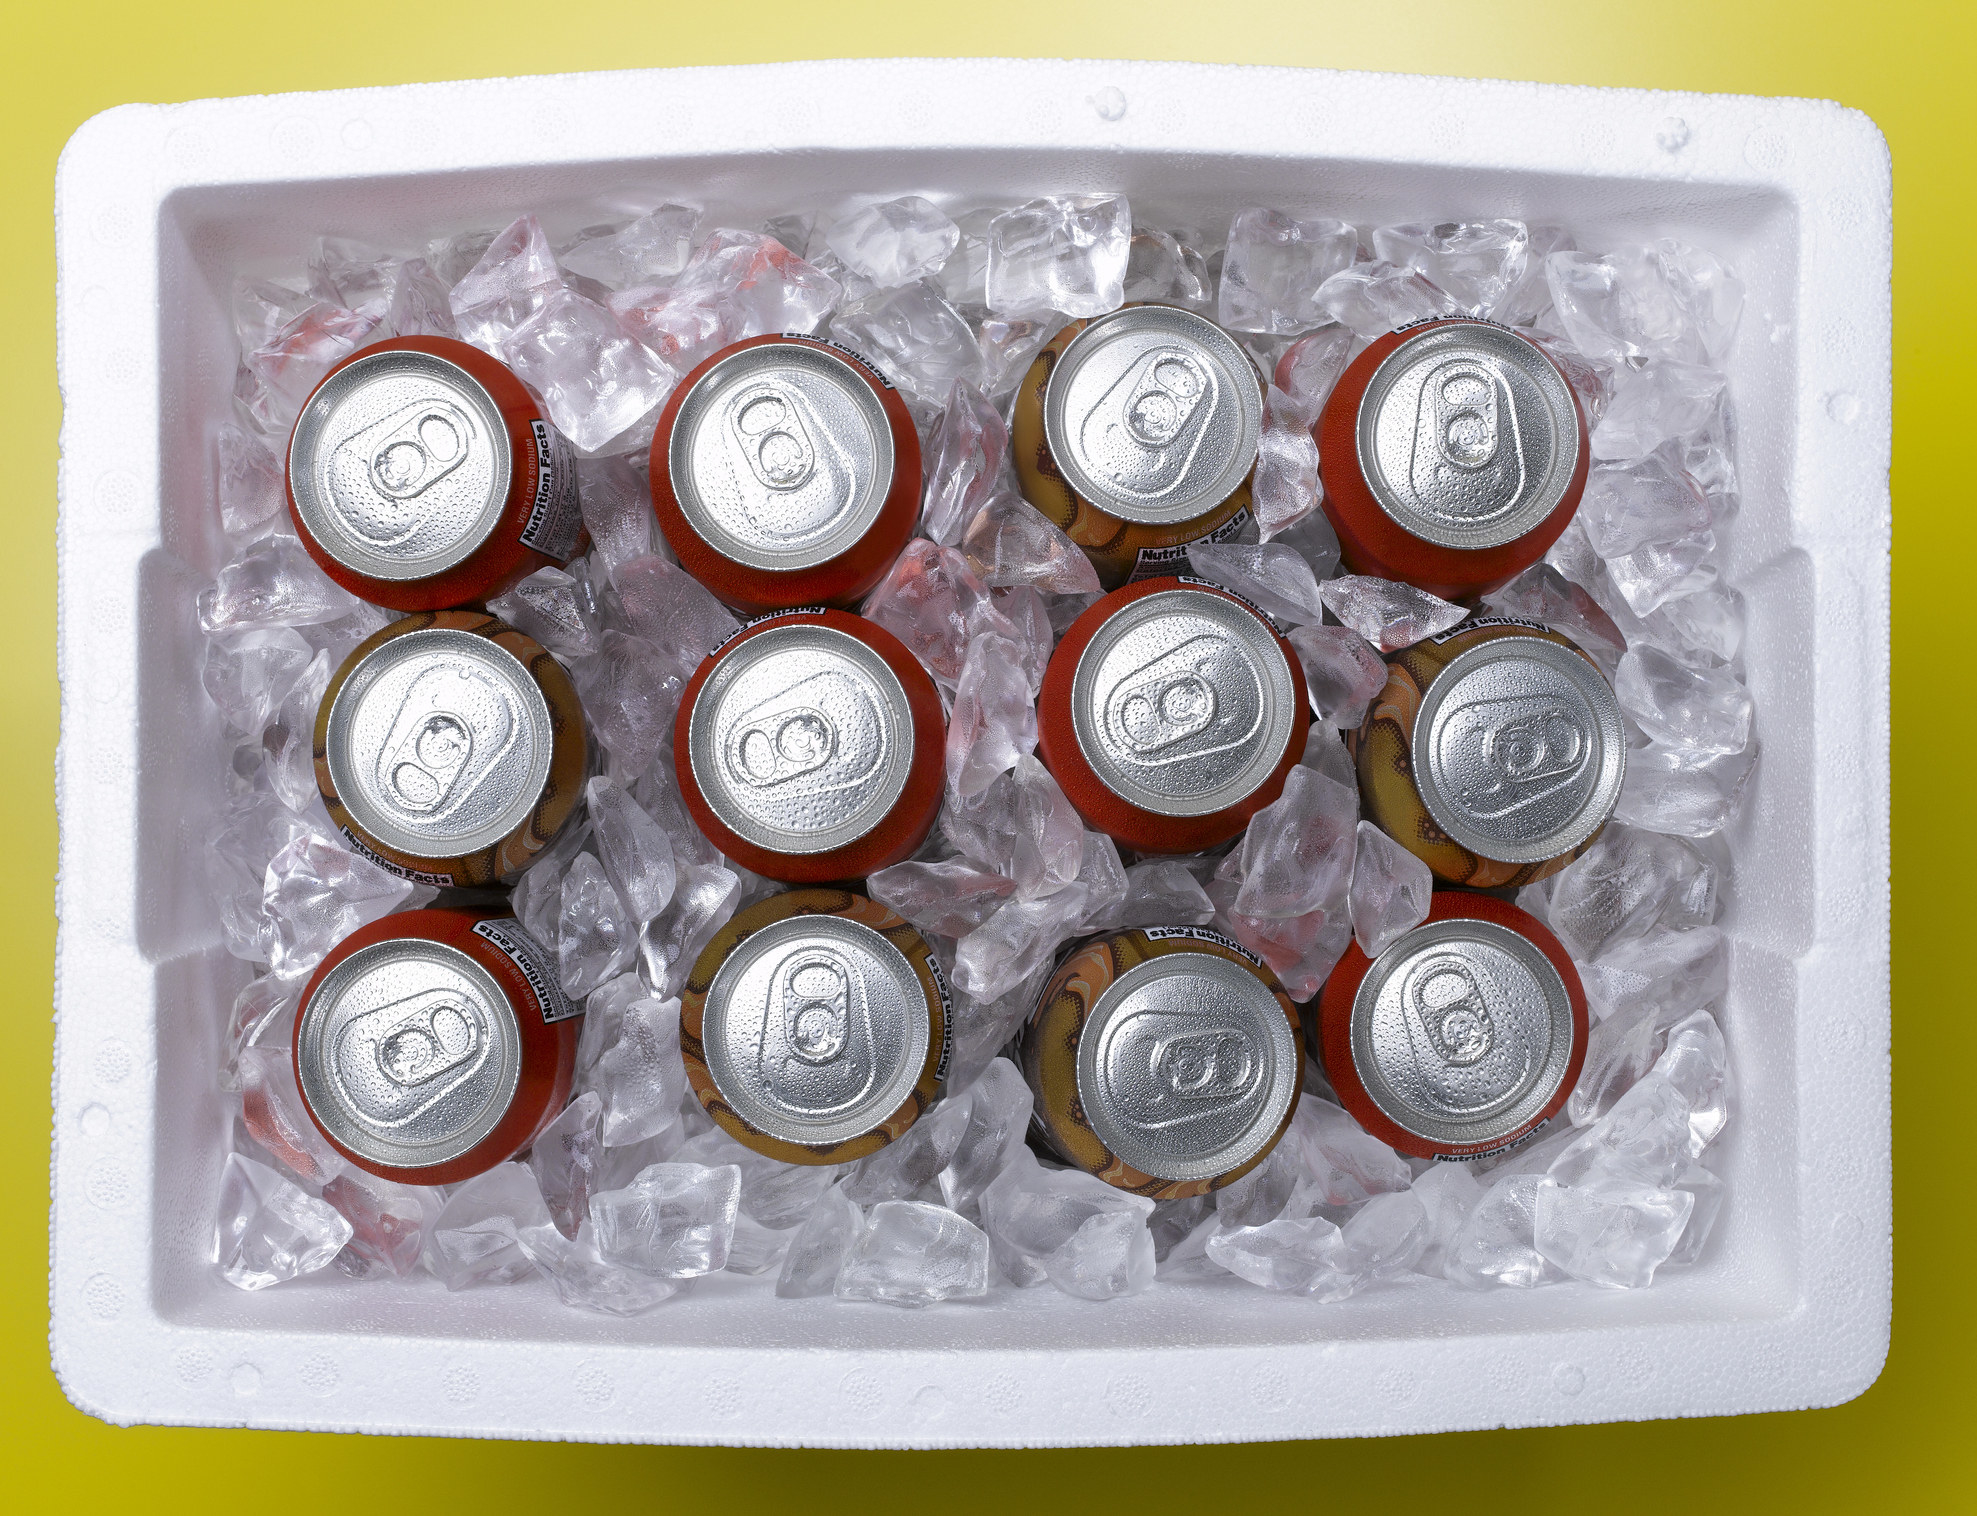 Cooler full of ice and sodas